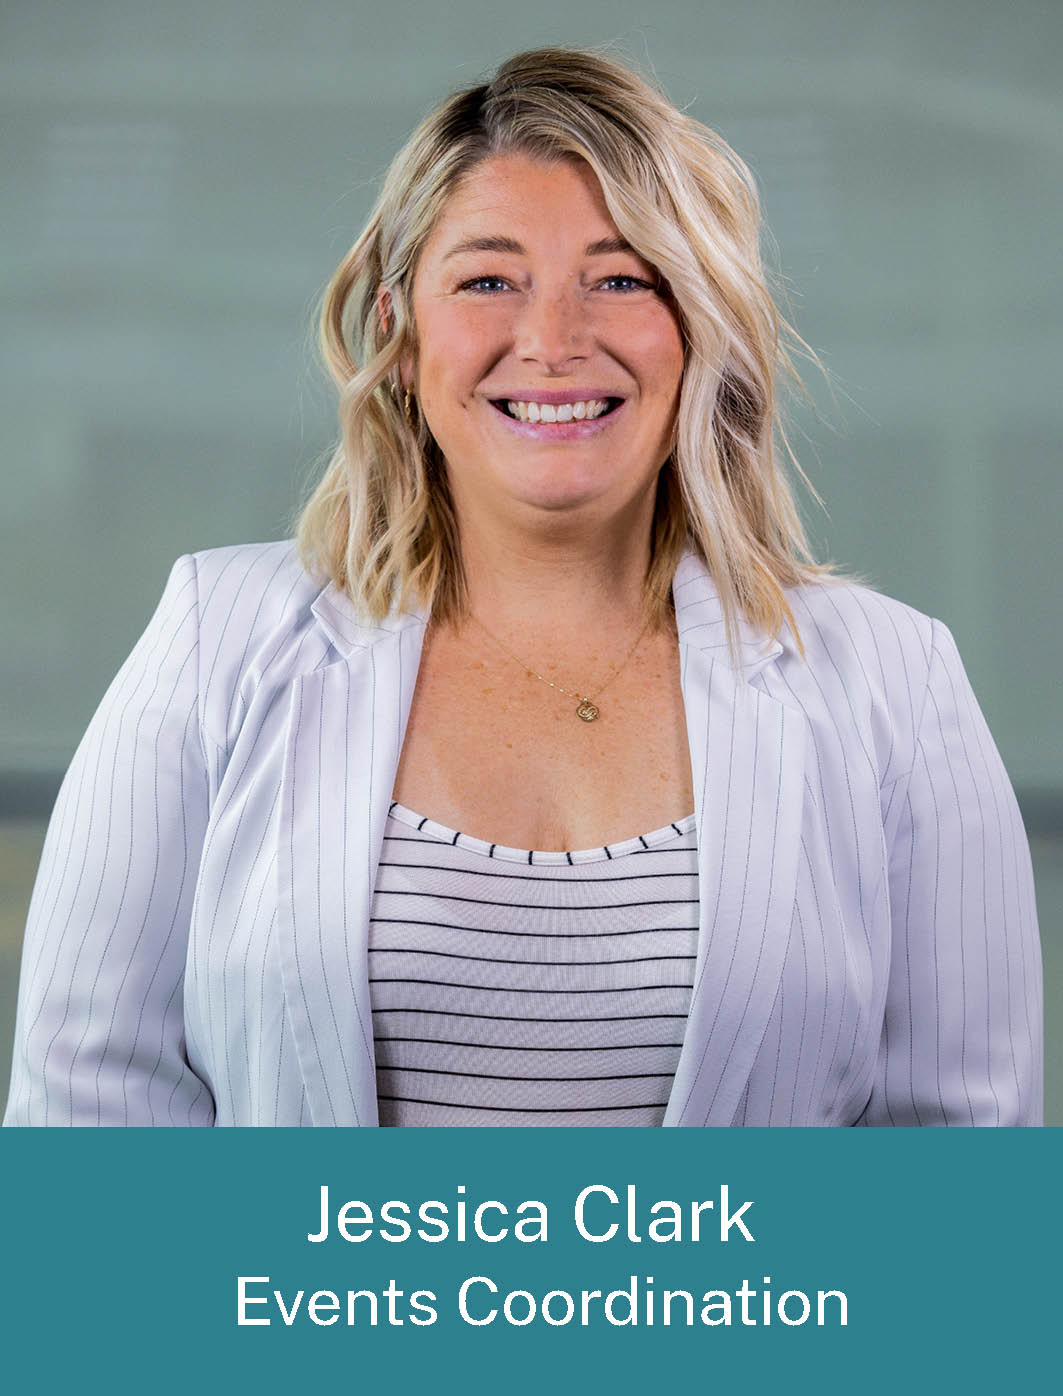 Jessica Clark, Events Coordinator, World Congress, Centre for Work Health and Safety